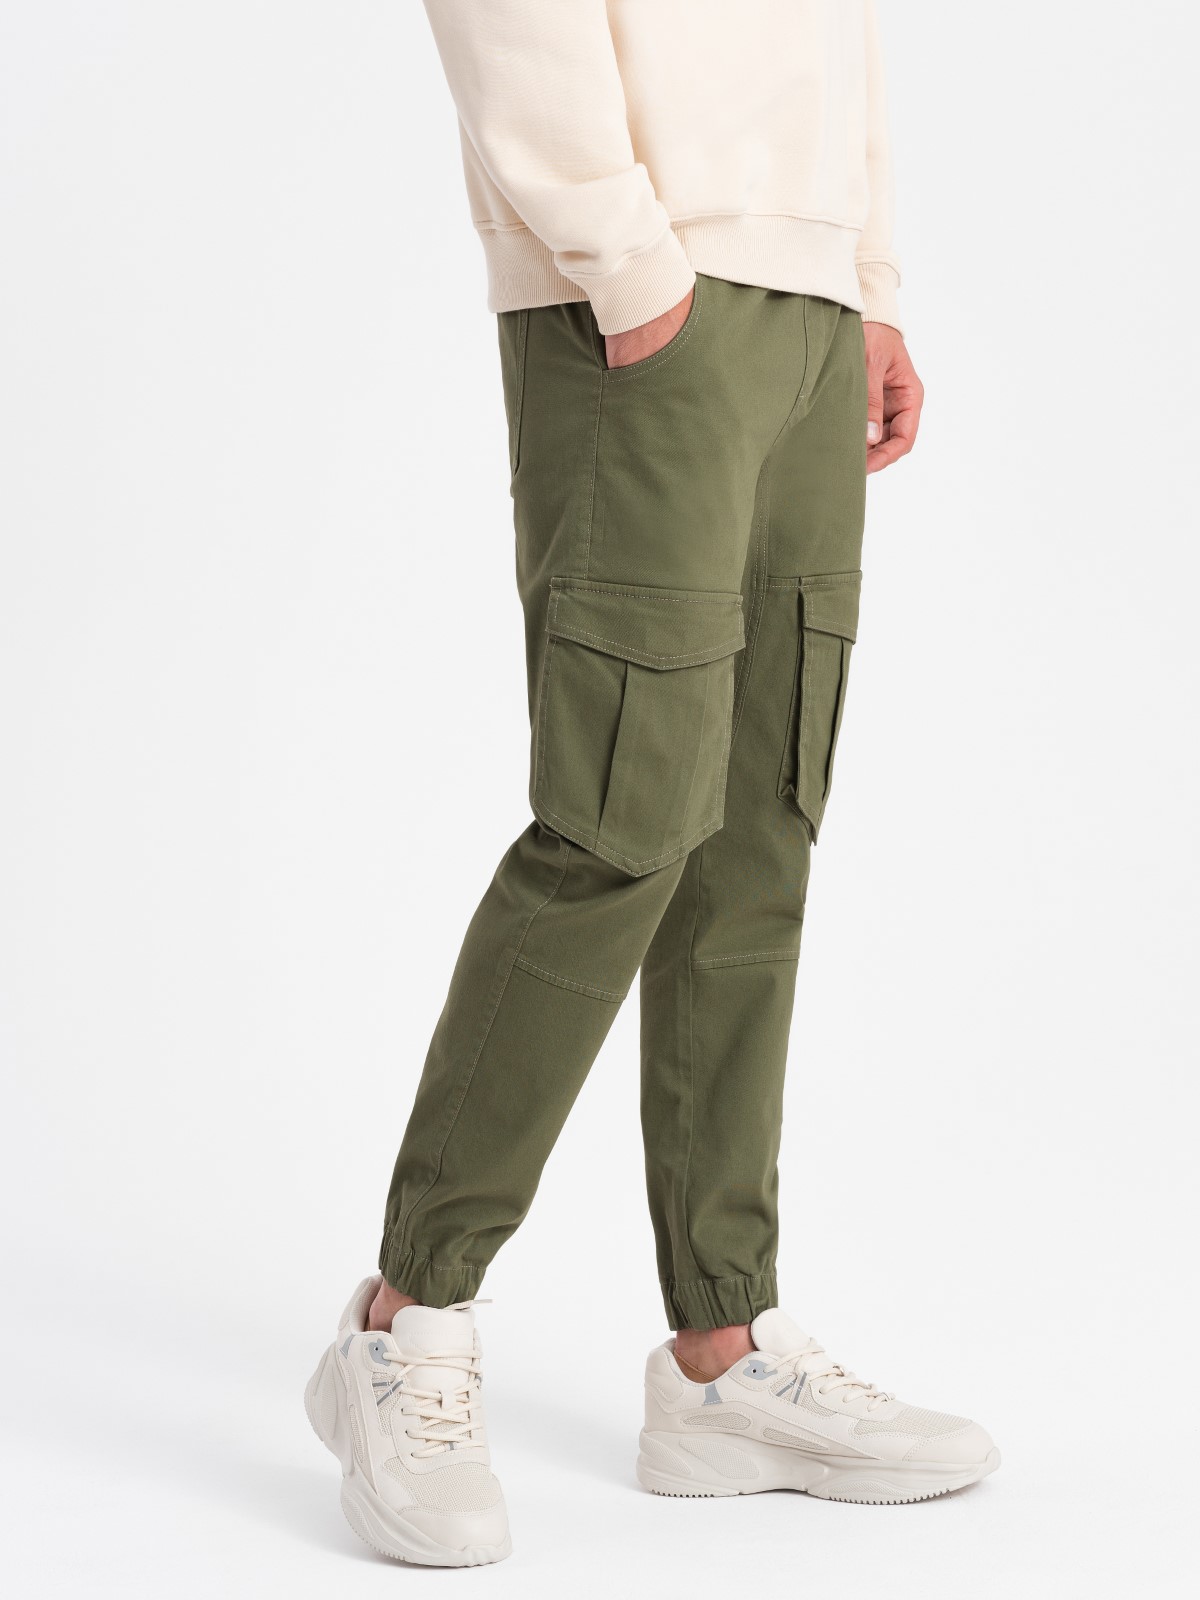 Men's JOGGERS pants with cargo pockets - olive V18 P886